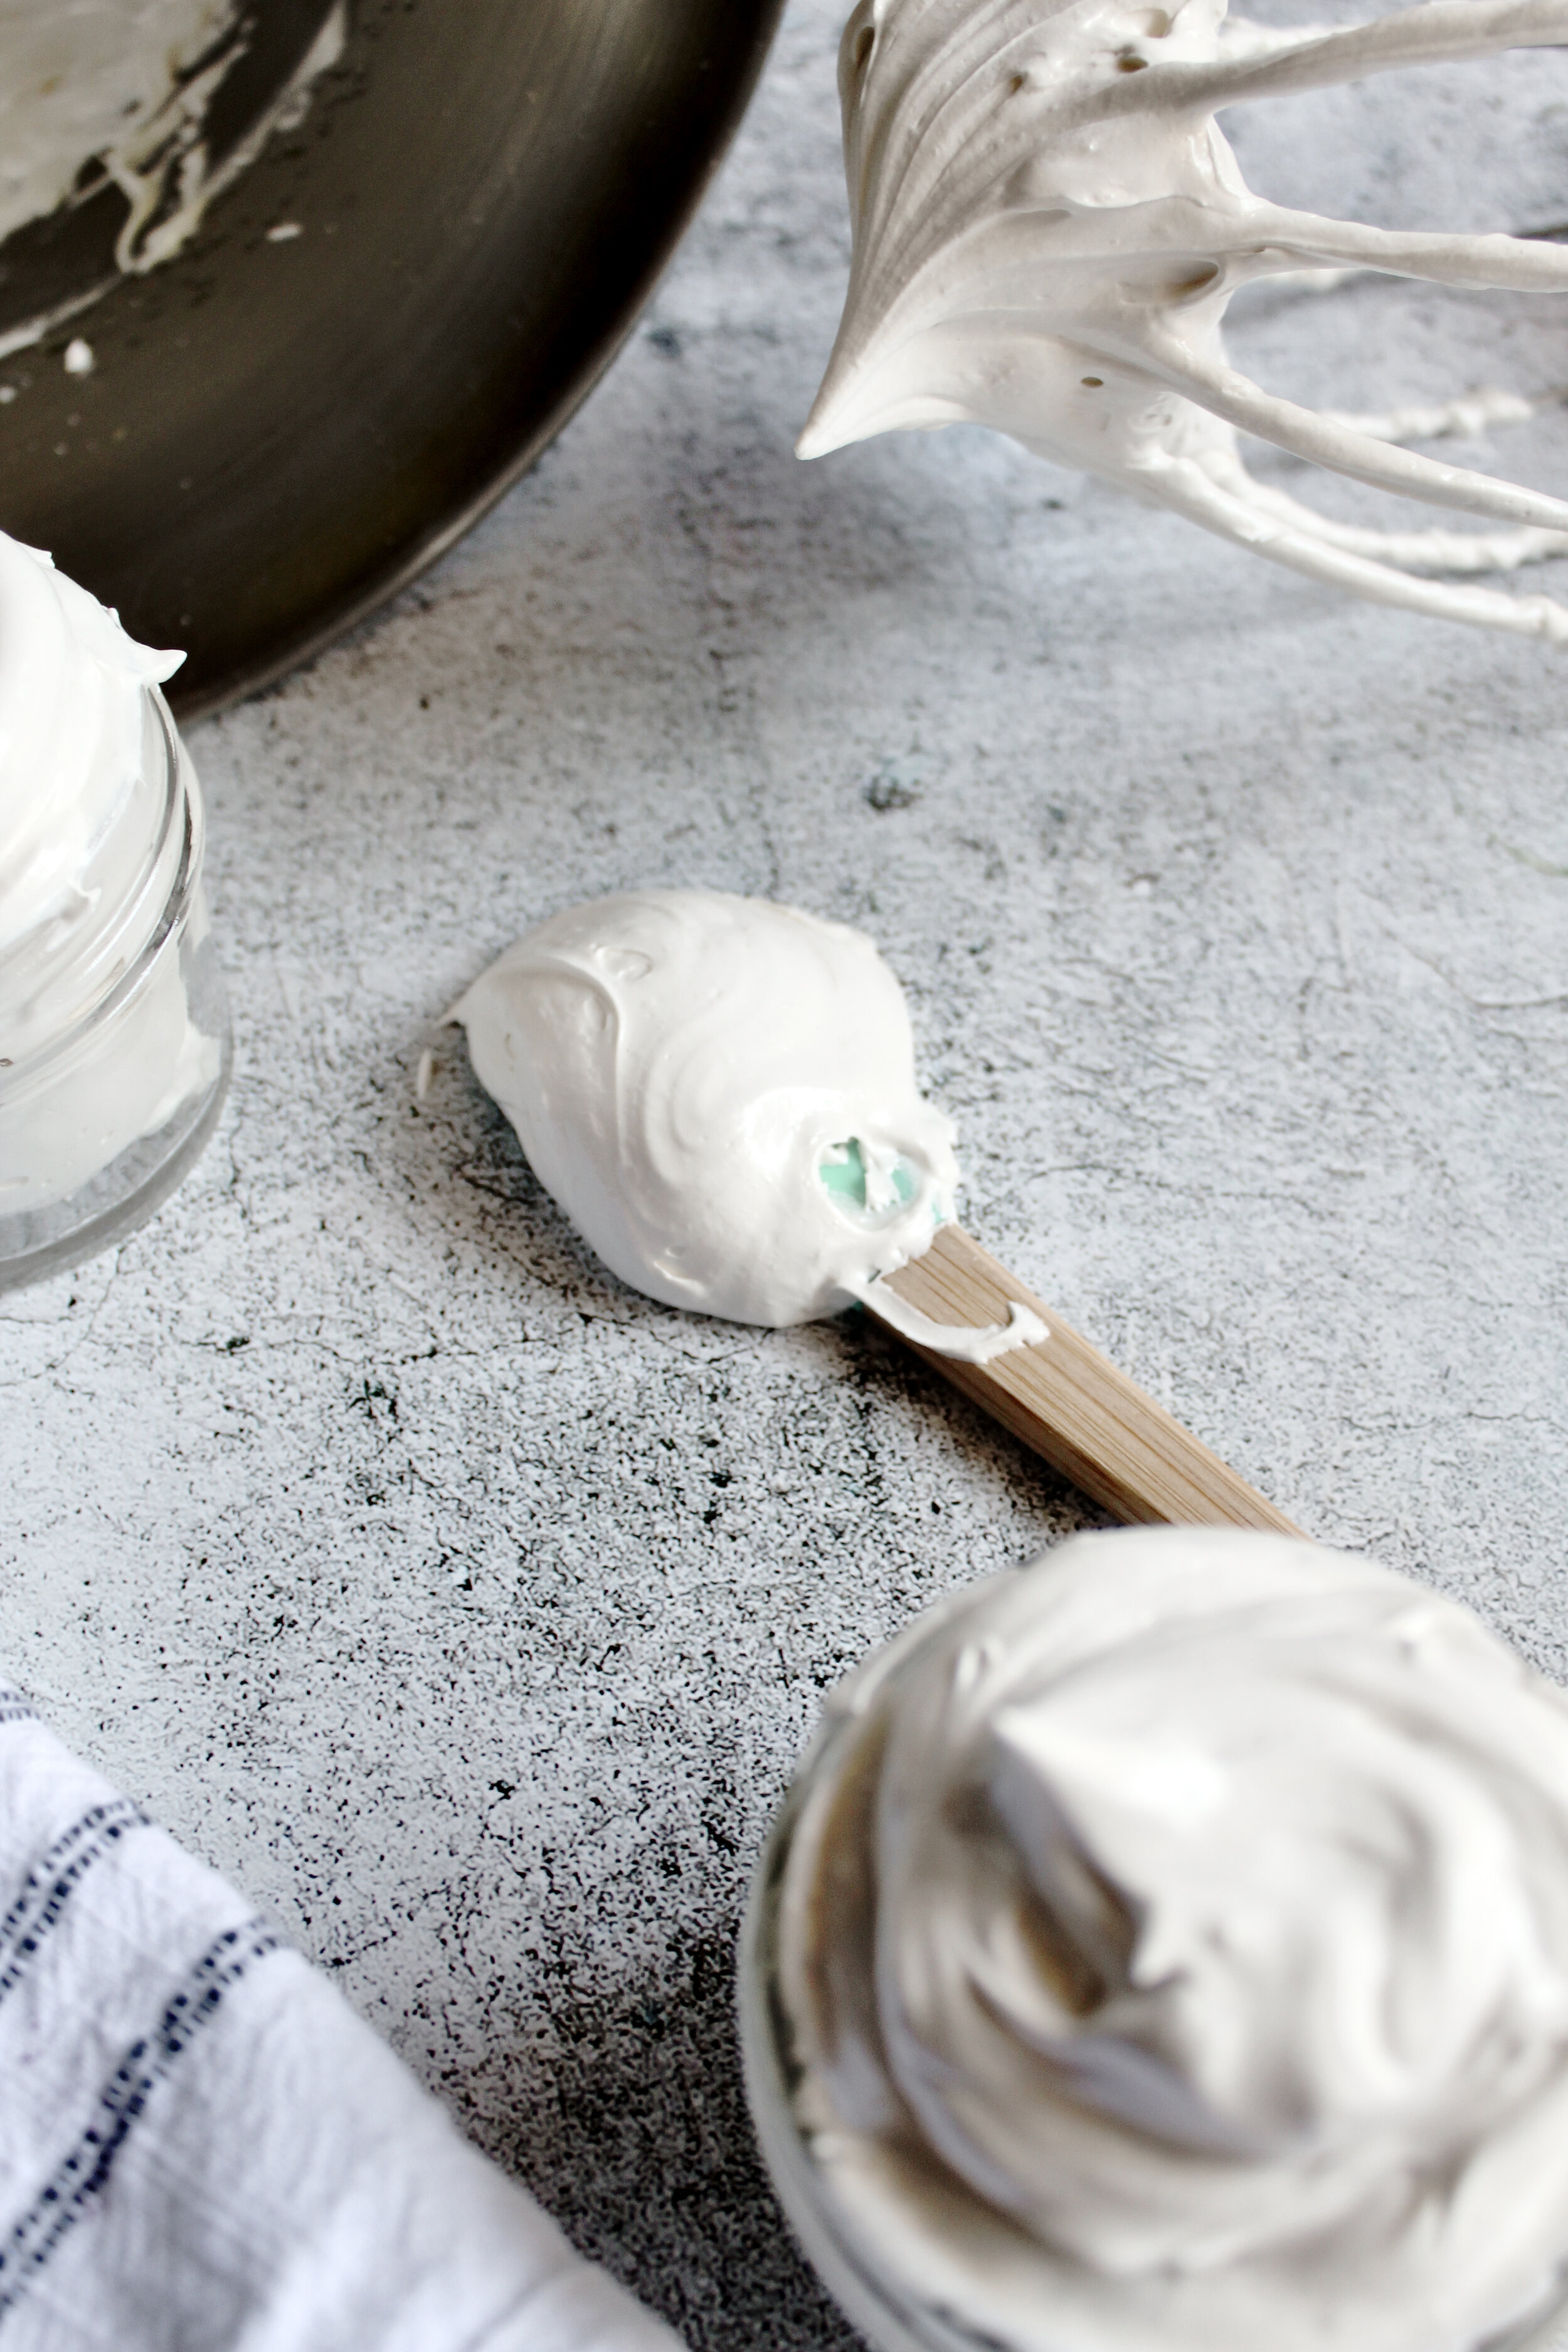 Homemade Marshmallow Fluff - Spend With Pennies